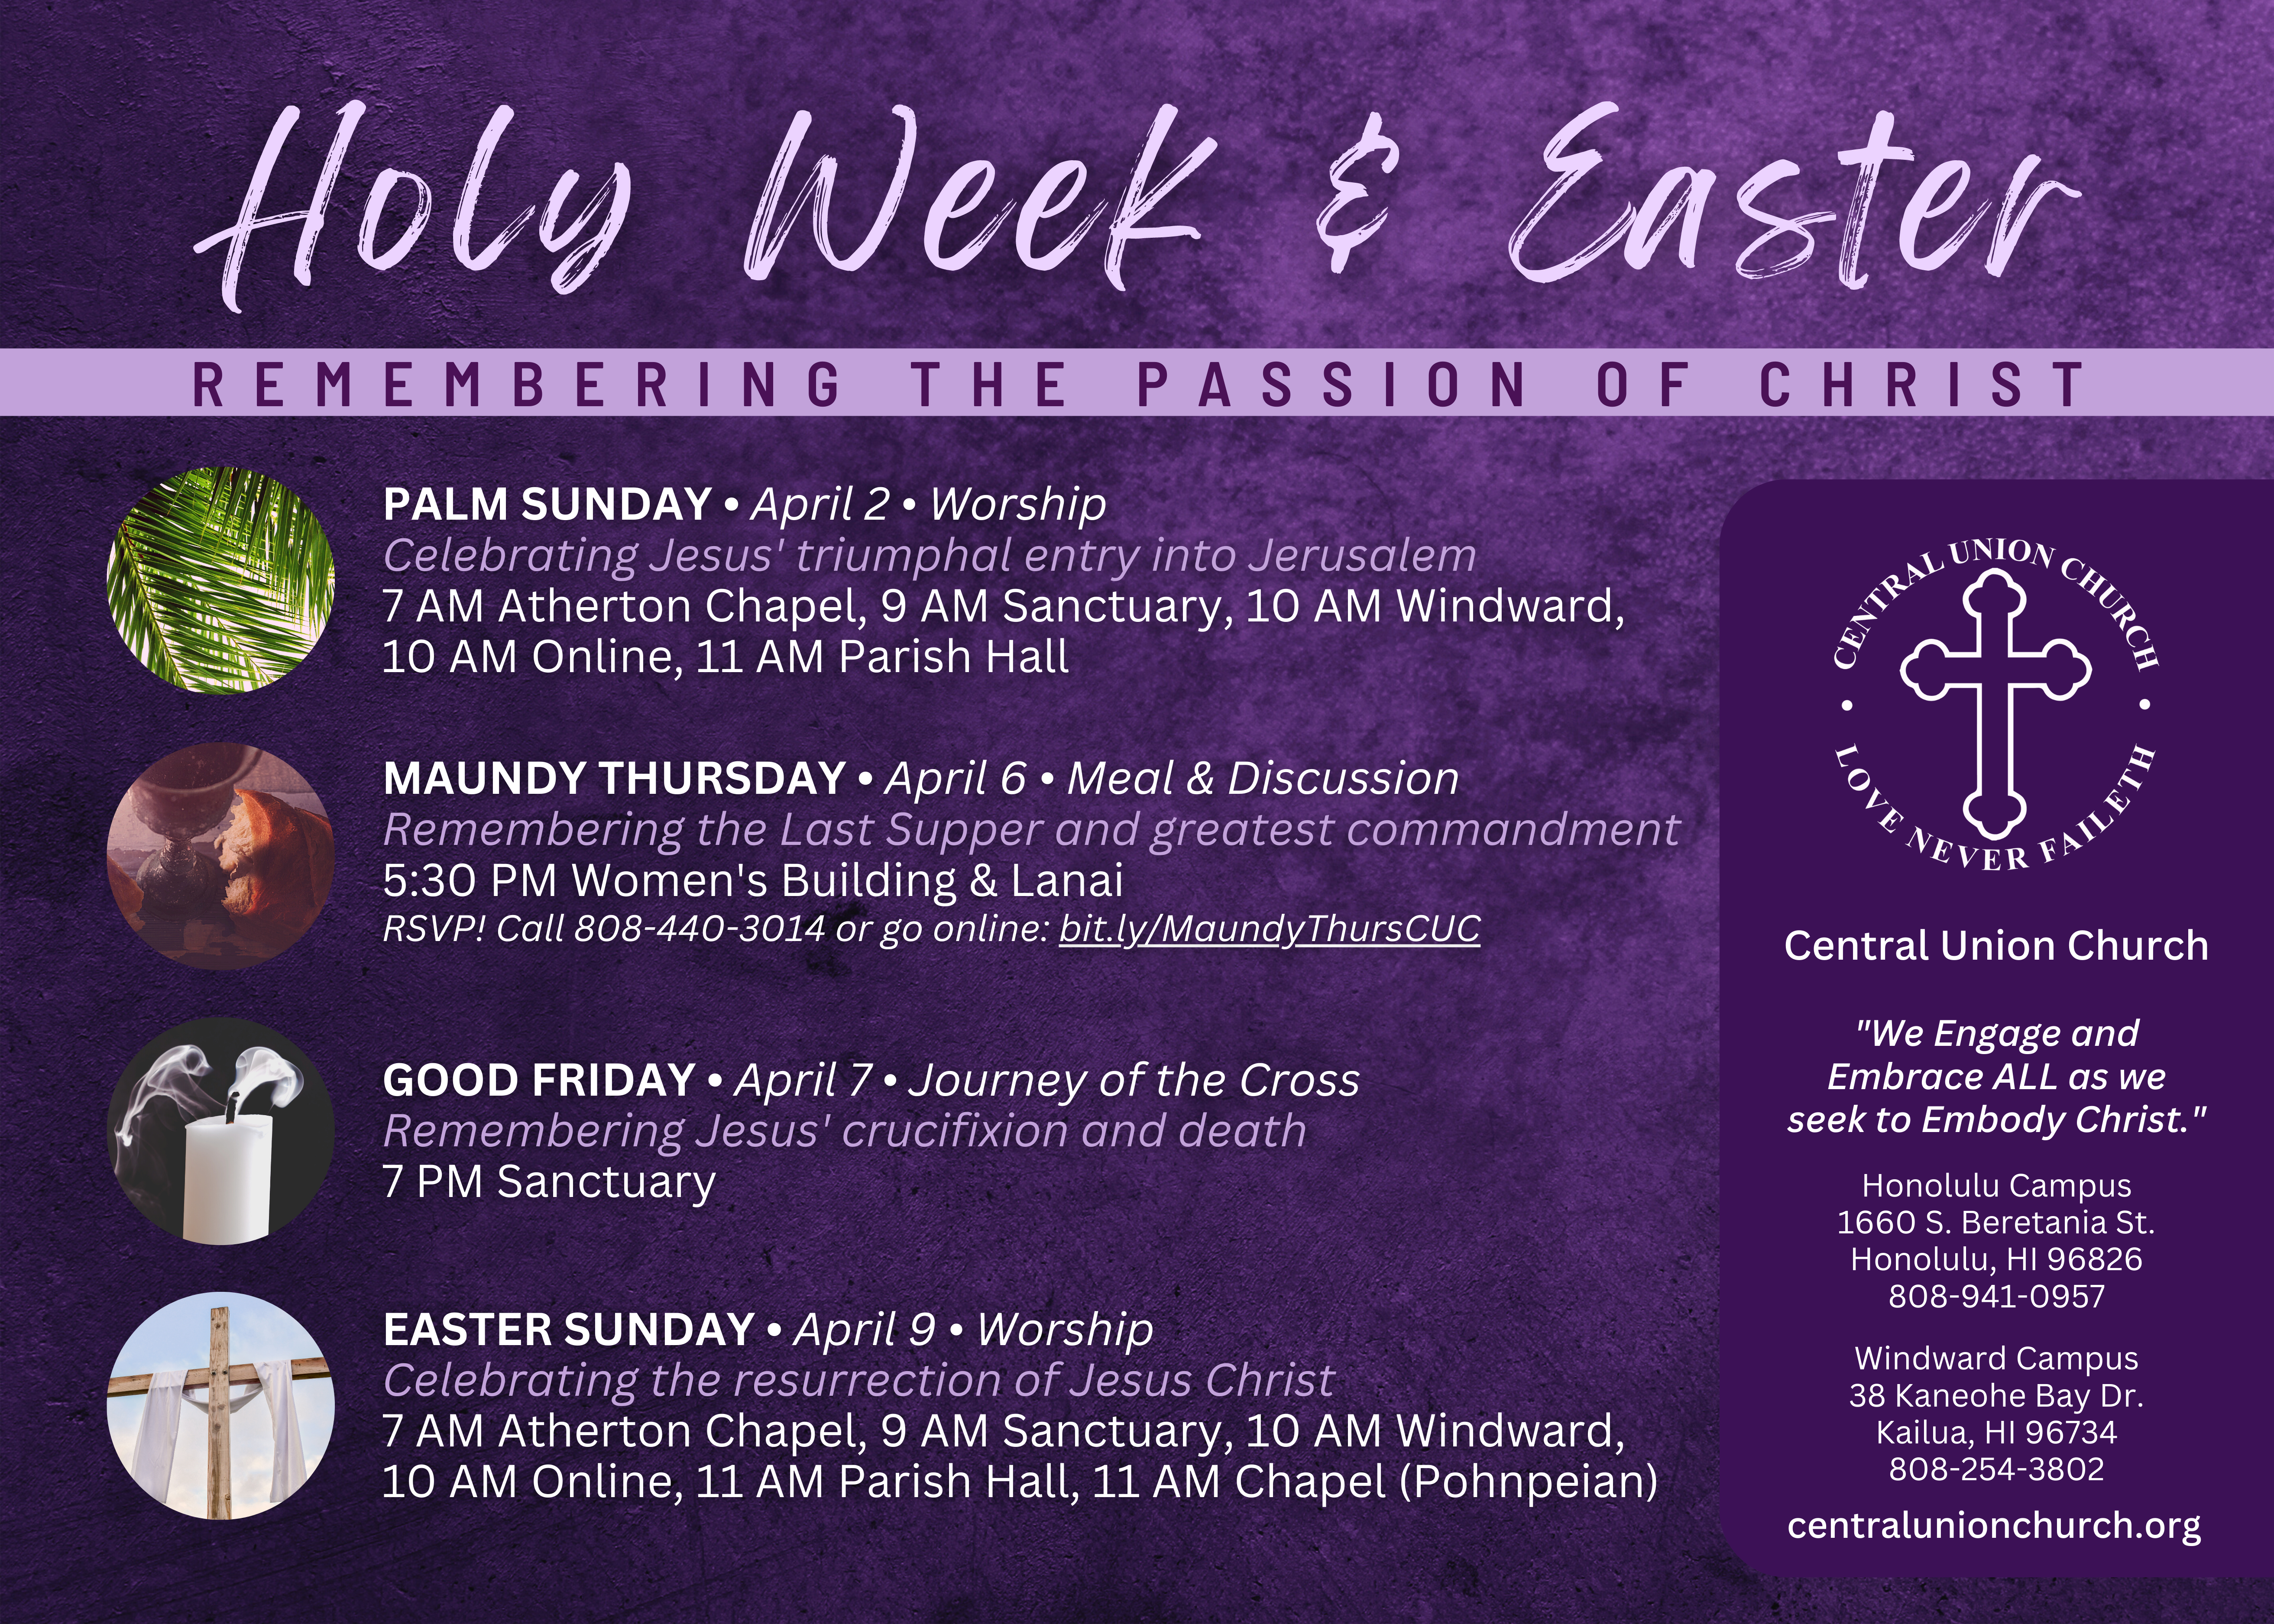 HOLY WEEK AND EASTER 2023 AT CENTRAL UNION CHURCH PALM SUNDAY • April 2 Worship services: 7 AM Atherton Chapel, 9 AM Sanctuary, 10 AM Windward, 10 AM Online, 11 AM Parish Hall MAUNDY THURSDAY • April 6 Neal & discussion: 5:30 PM Women's Building & Lanai (RSVP at bit.ly/MaundyThursCUC) GOOD FRIDAY • April 7 Journey of the Cross, service: 7 PM Sanctuary EASTER SUNDAY • April 9 Worship services: 7 AM Atherton Chapel, 9 AM Sanctuary, 10 AM Windward, 10 AM Online, 11 AM Parish Hall, 11 AM Chapel (Pohnpeian)